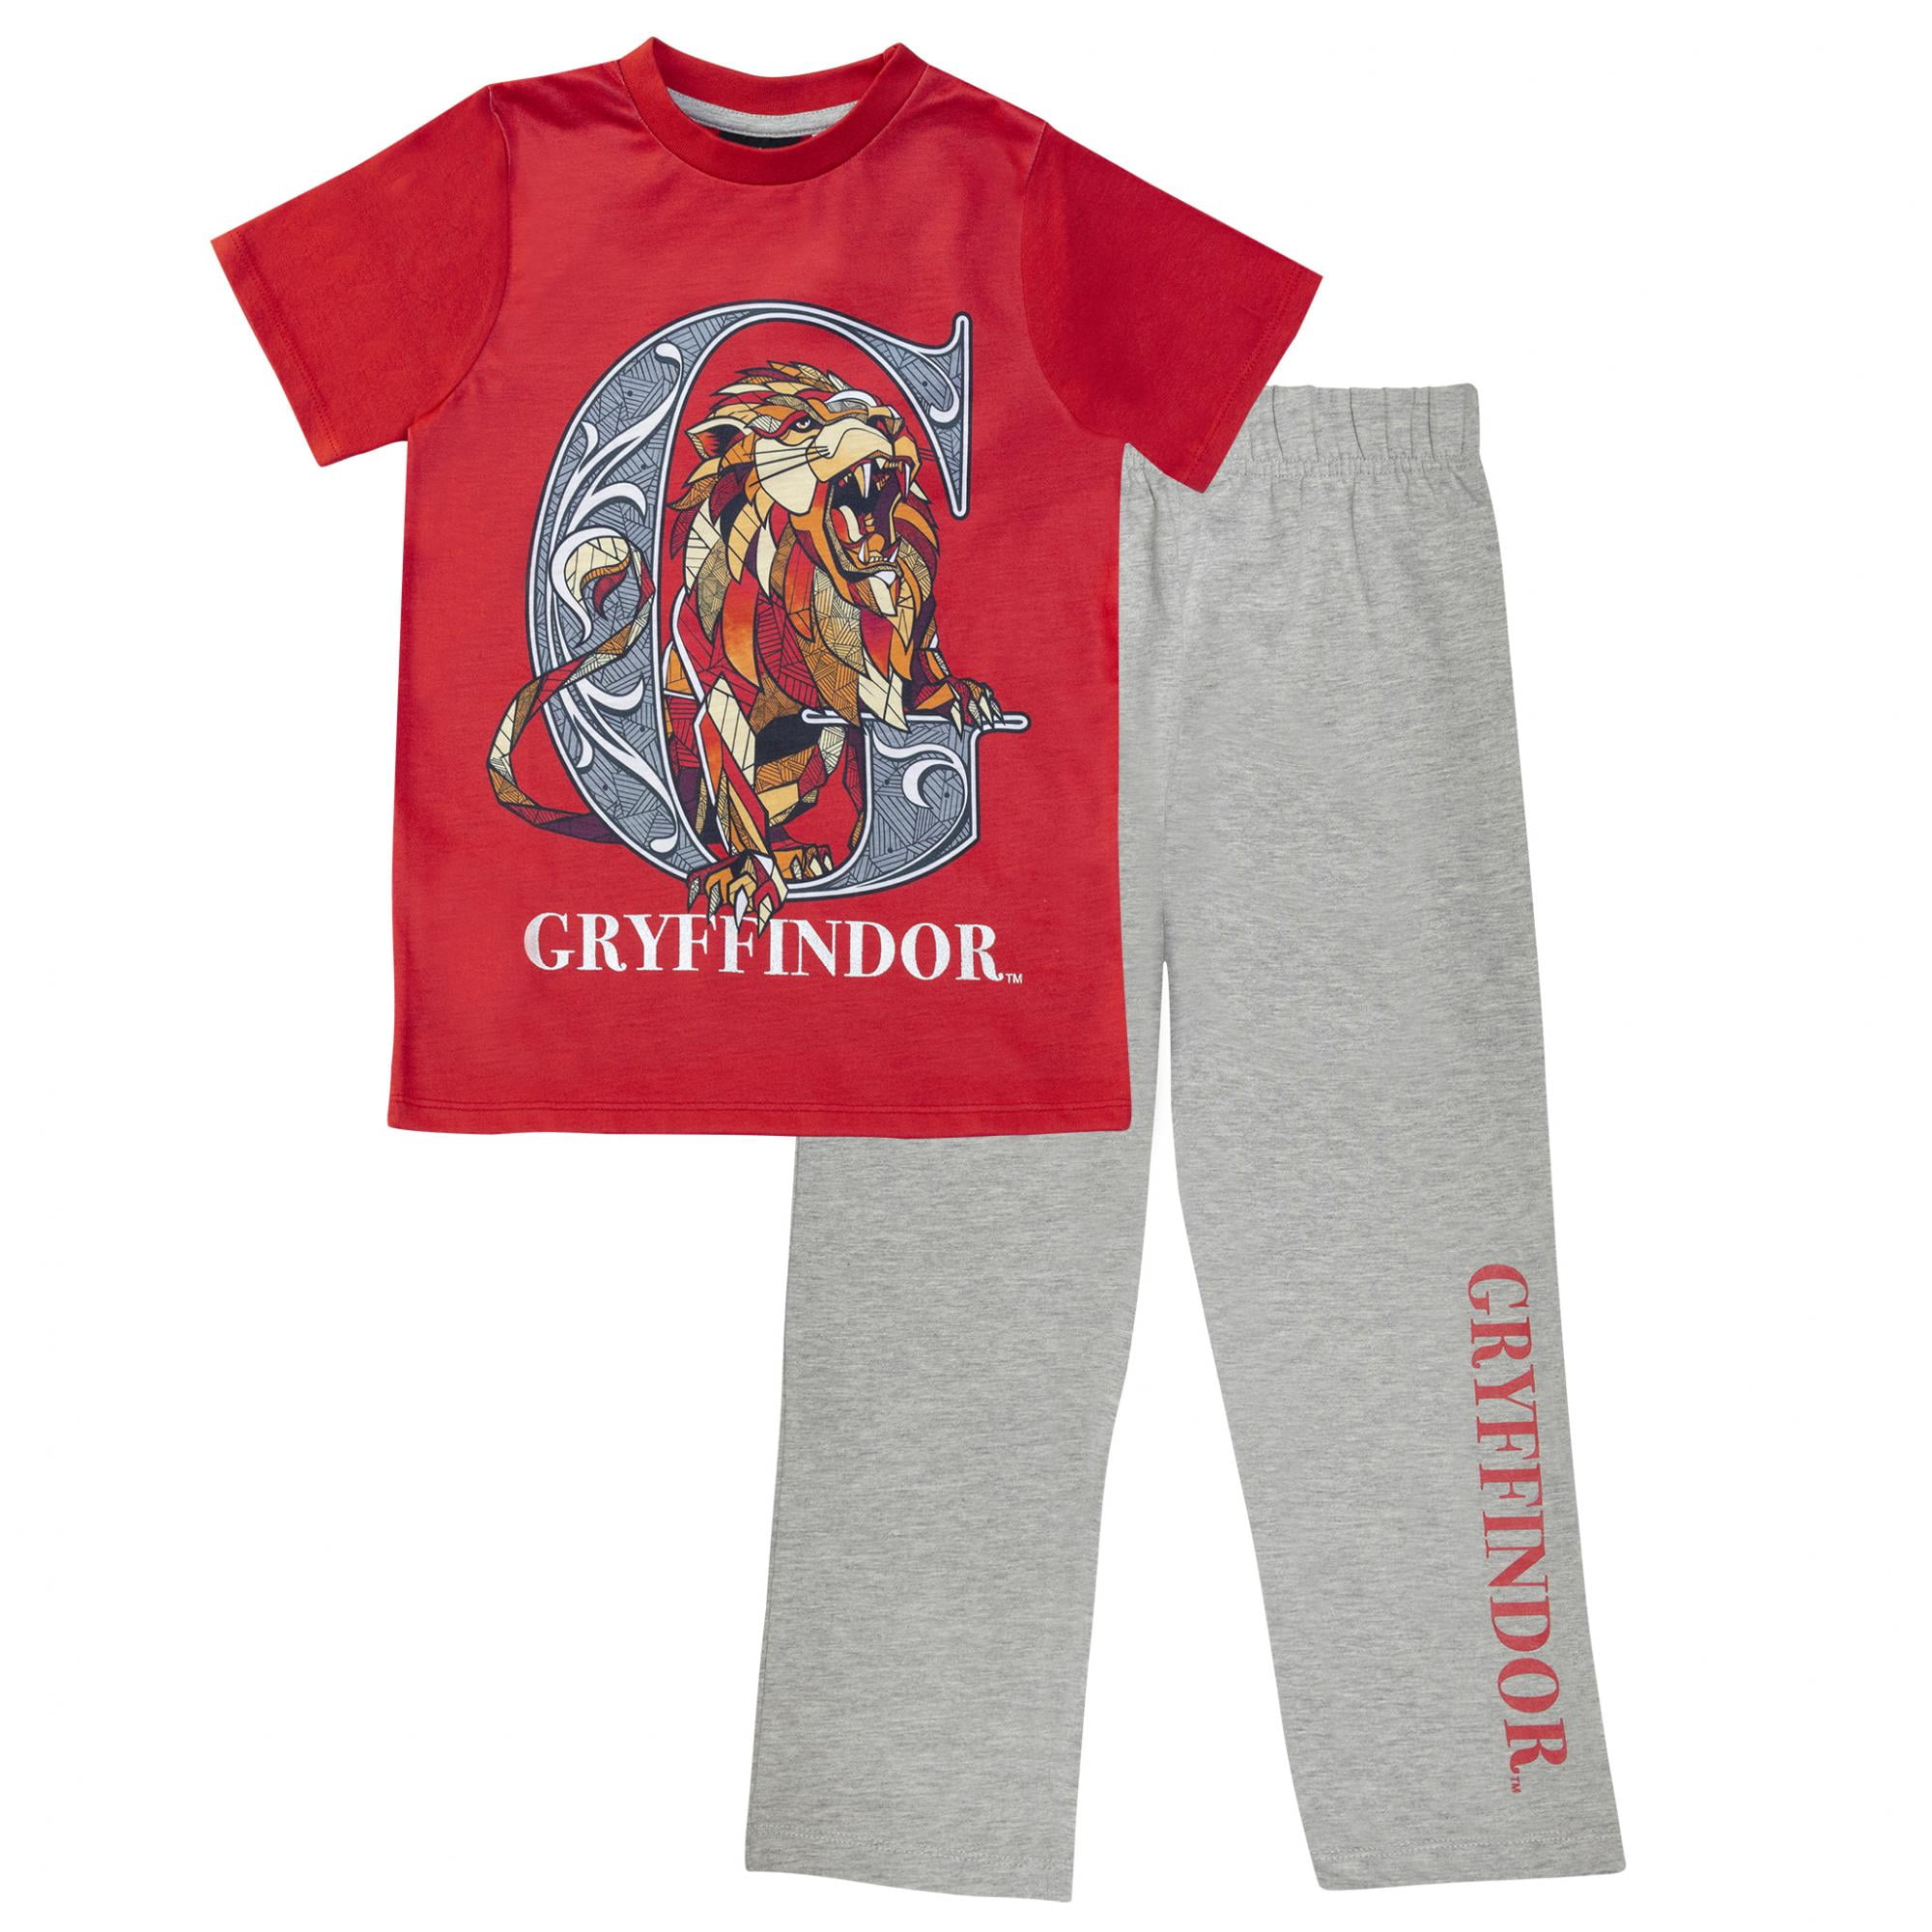 Men's Harry Potter Gryffindor Character Cotton Pyjamas Sizes M to 5XL 